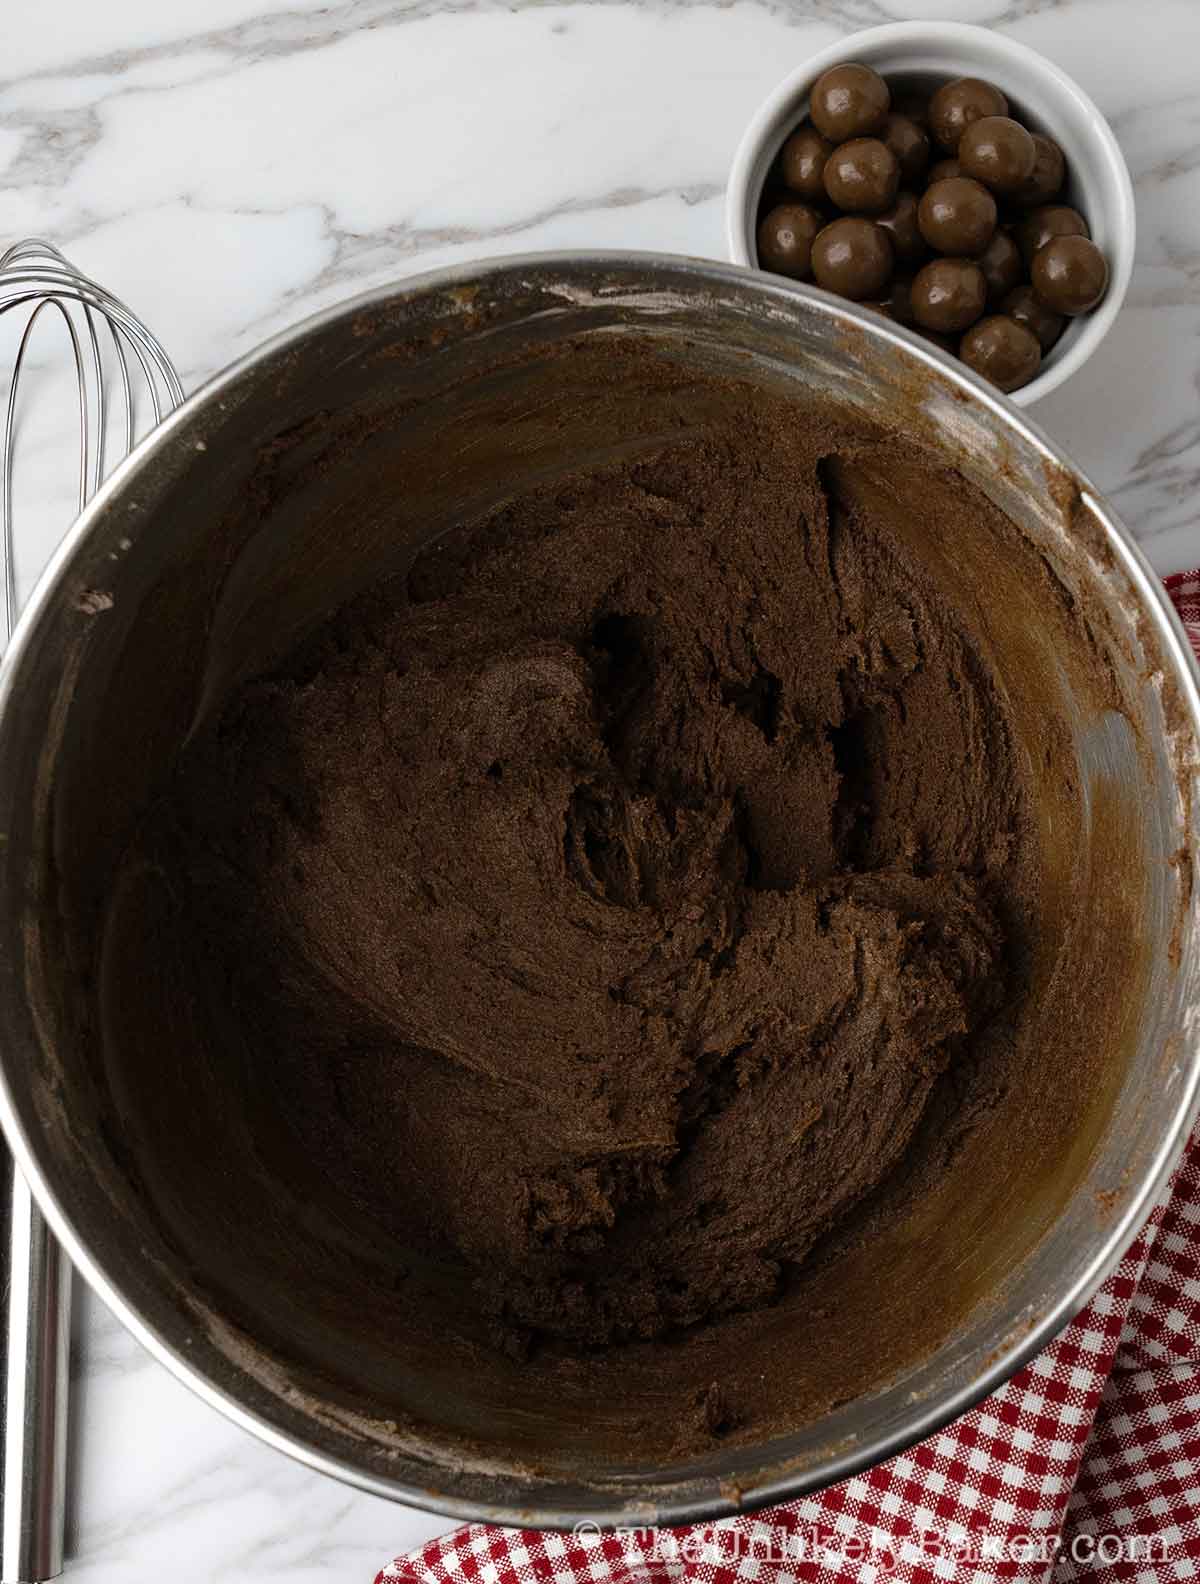 Chocolate cookie dough in a bowl.